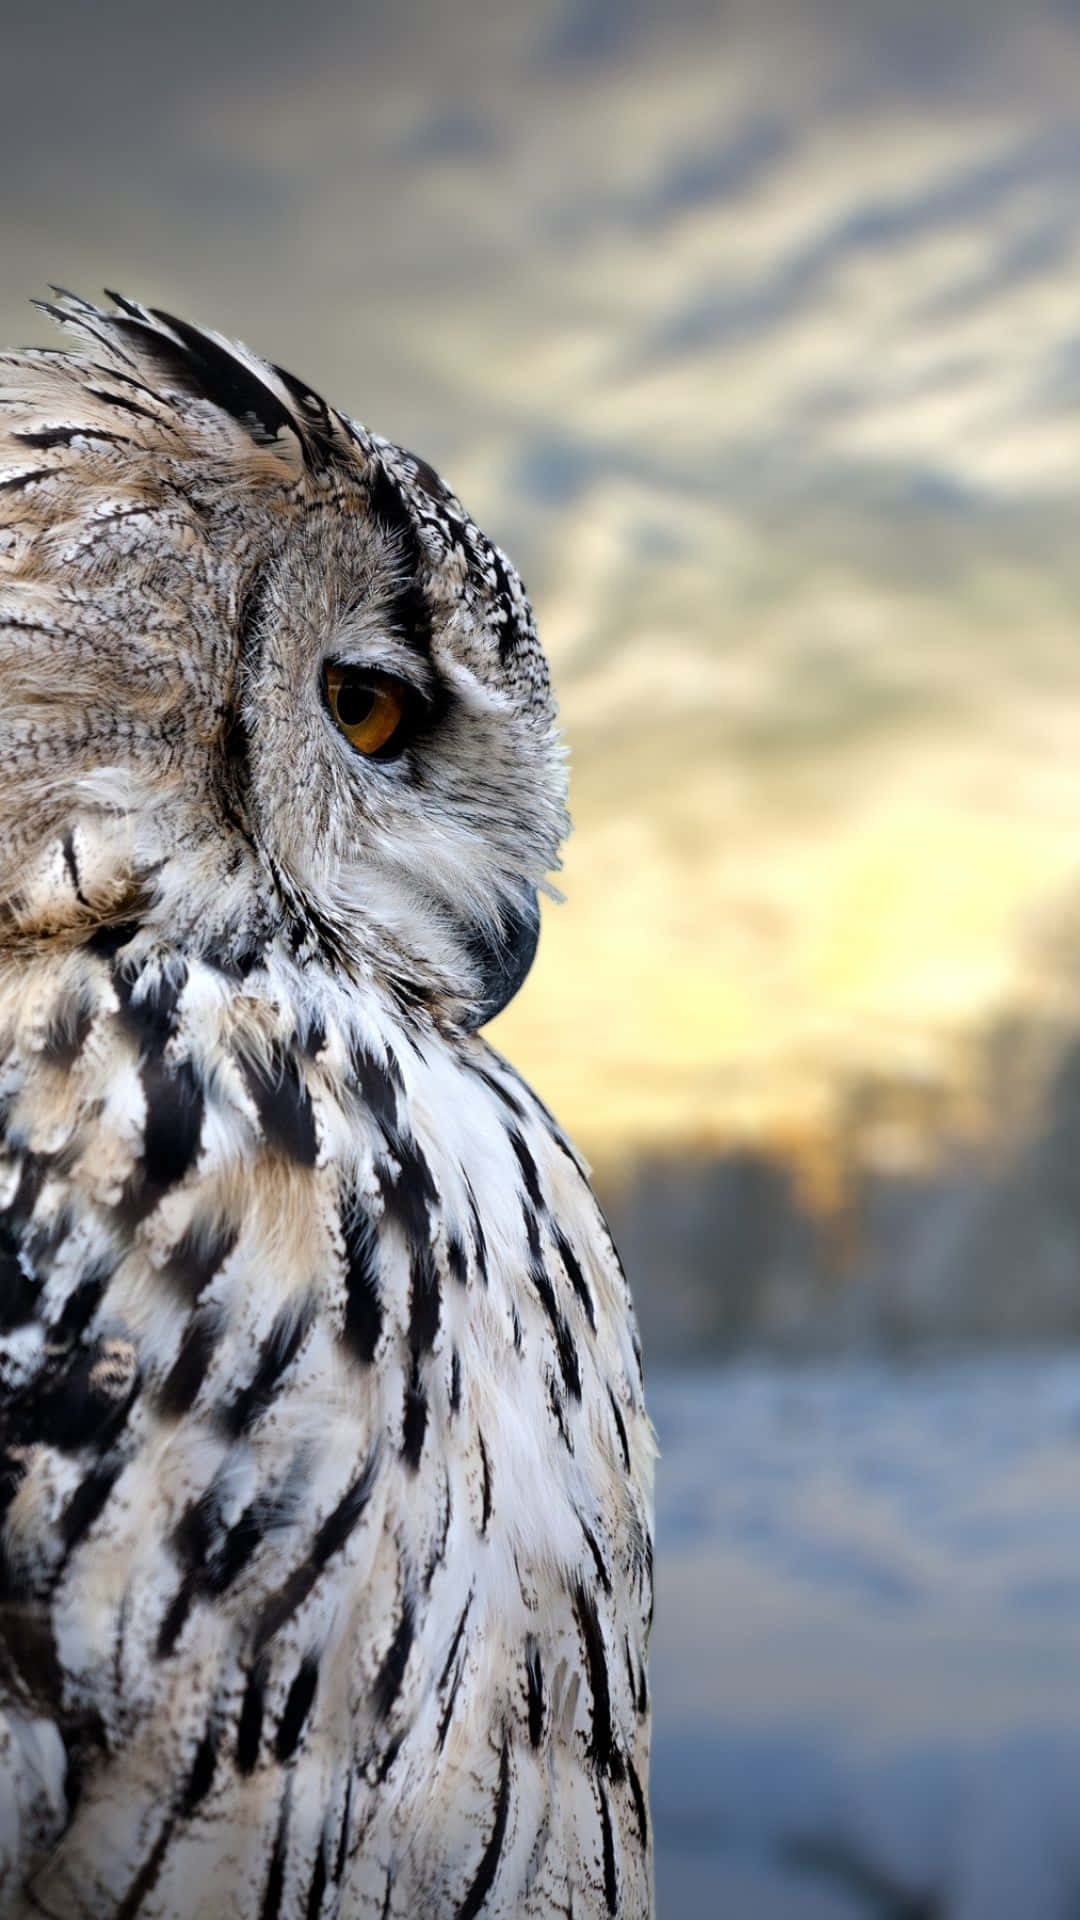 A close-up of an owl with watchful, knowing eyes